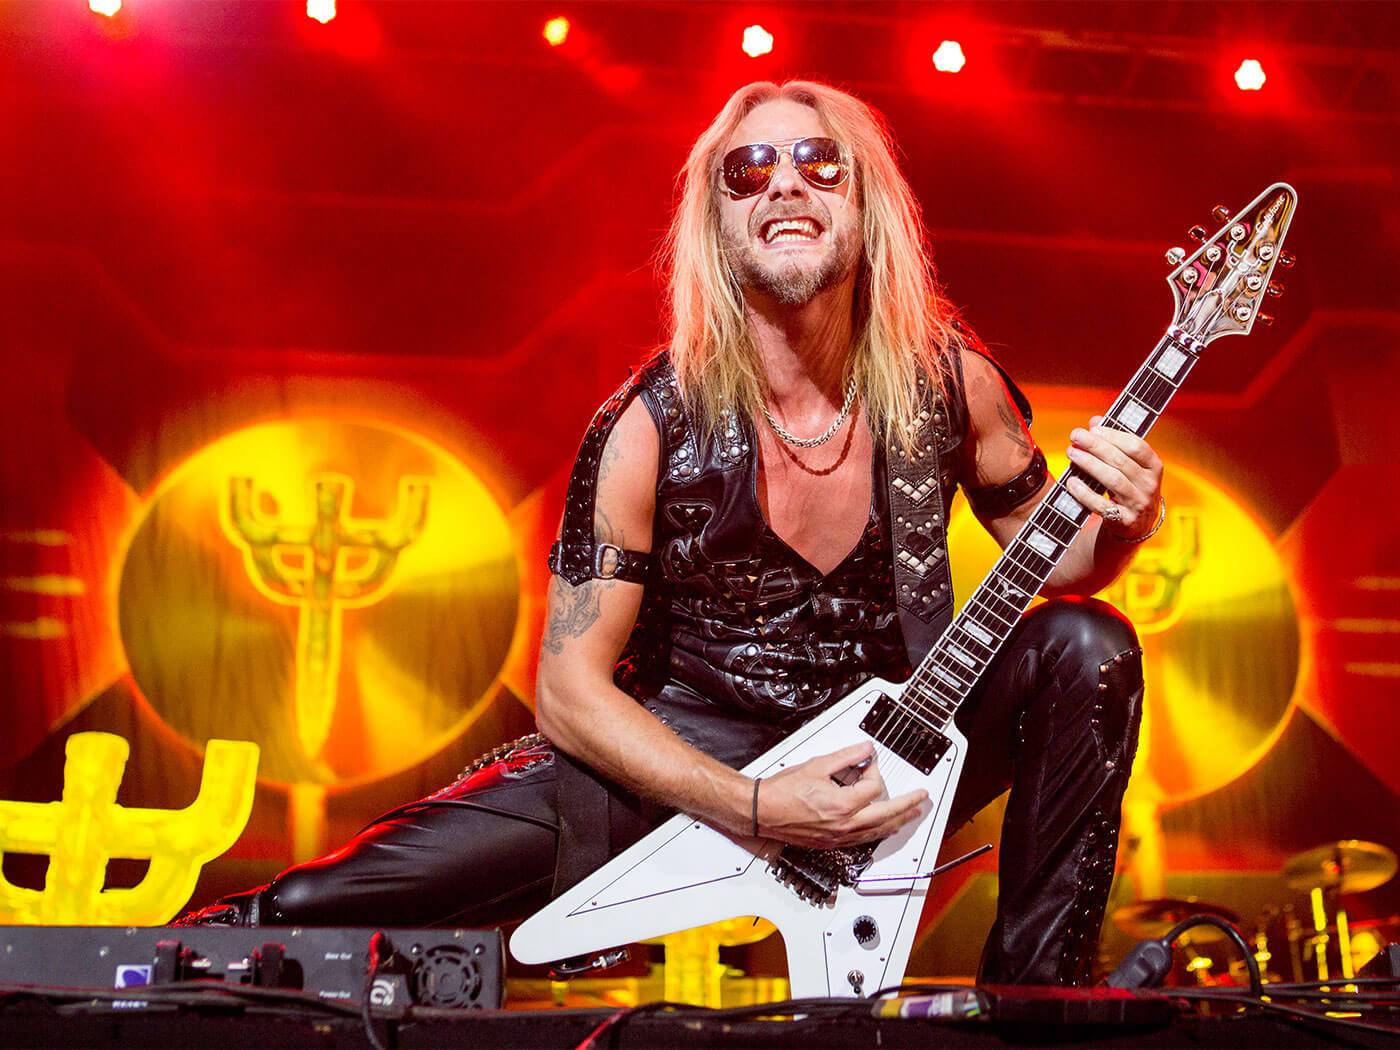 Judas Priest's Richie Faulkner hospitalised due to “major heart condition  issues”, guitarists send well-wishes